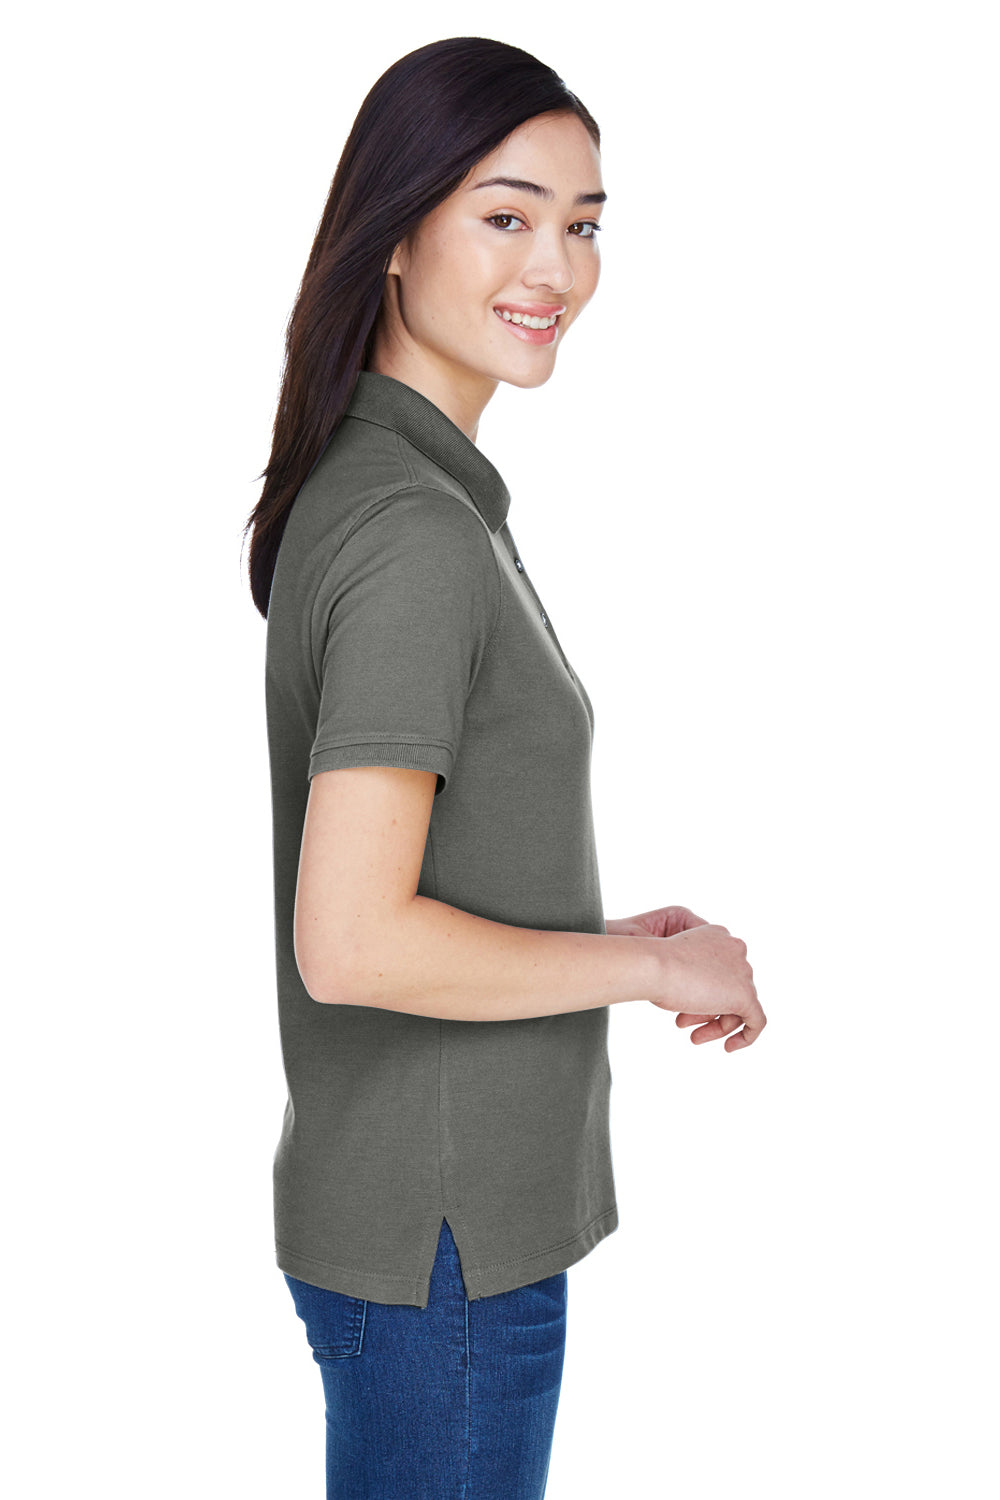 Harriton M265W Womens Easy Blend Wrinkle Resistant Short Sleeve Polo Shirt Charcoal Grey Side